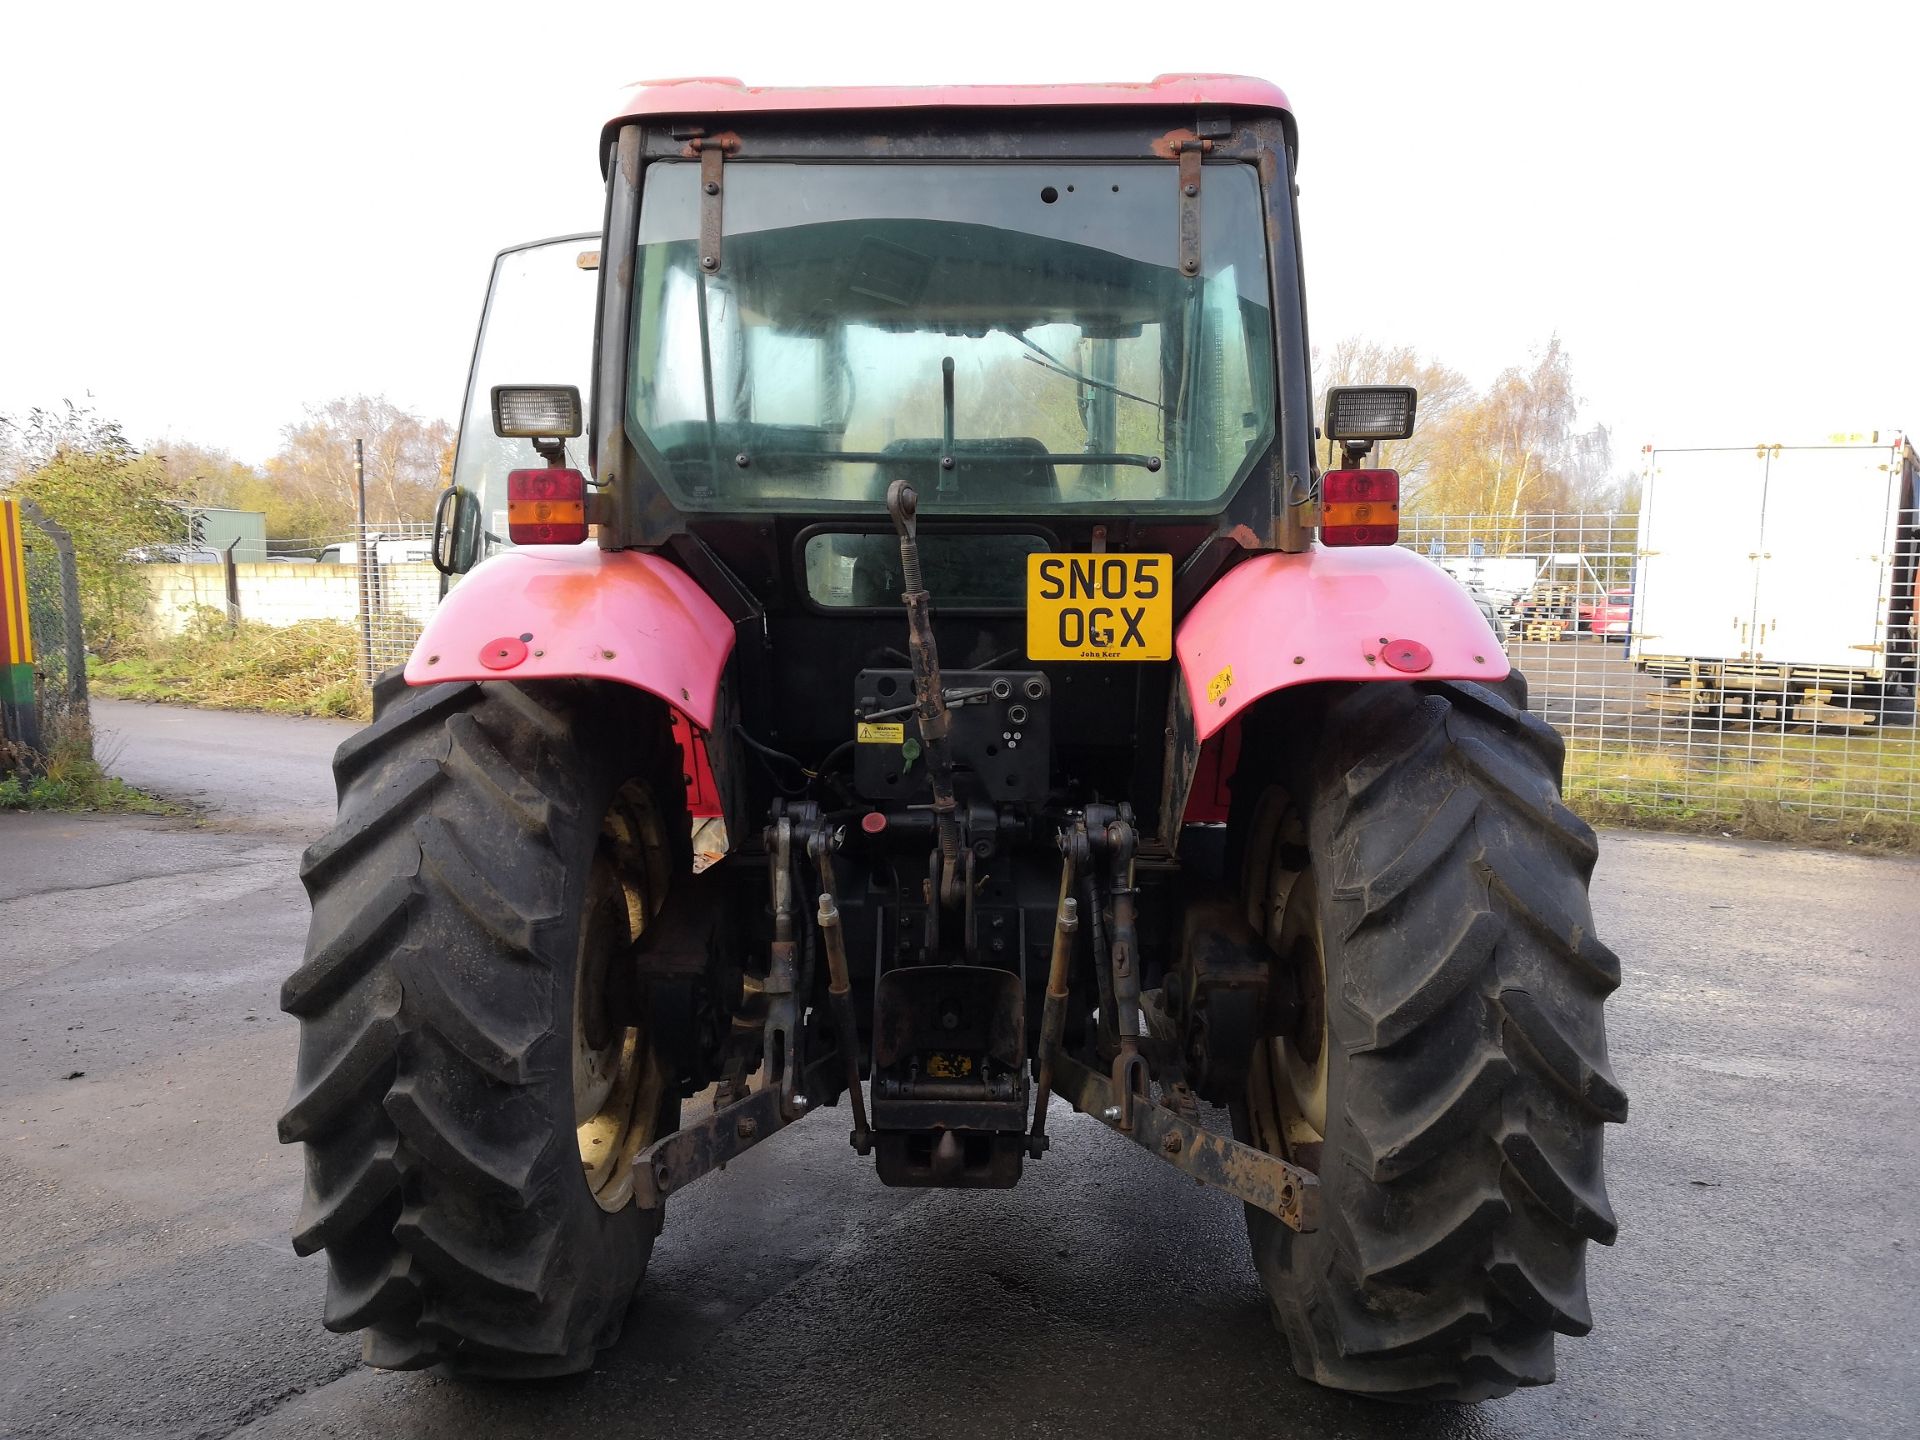 2005/05 REG ZETOR 8441 PROXIMA RED DIESEL TRACTOR WITH TRAC-LIFT 120 SL FRONT LOADER *NO VAT* - Image 5 of 18